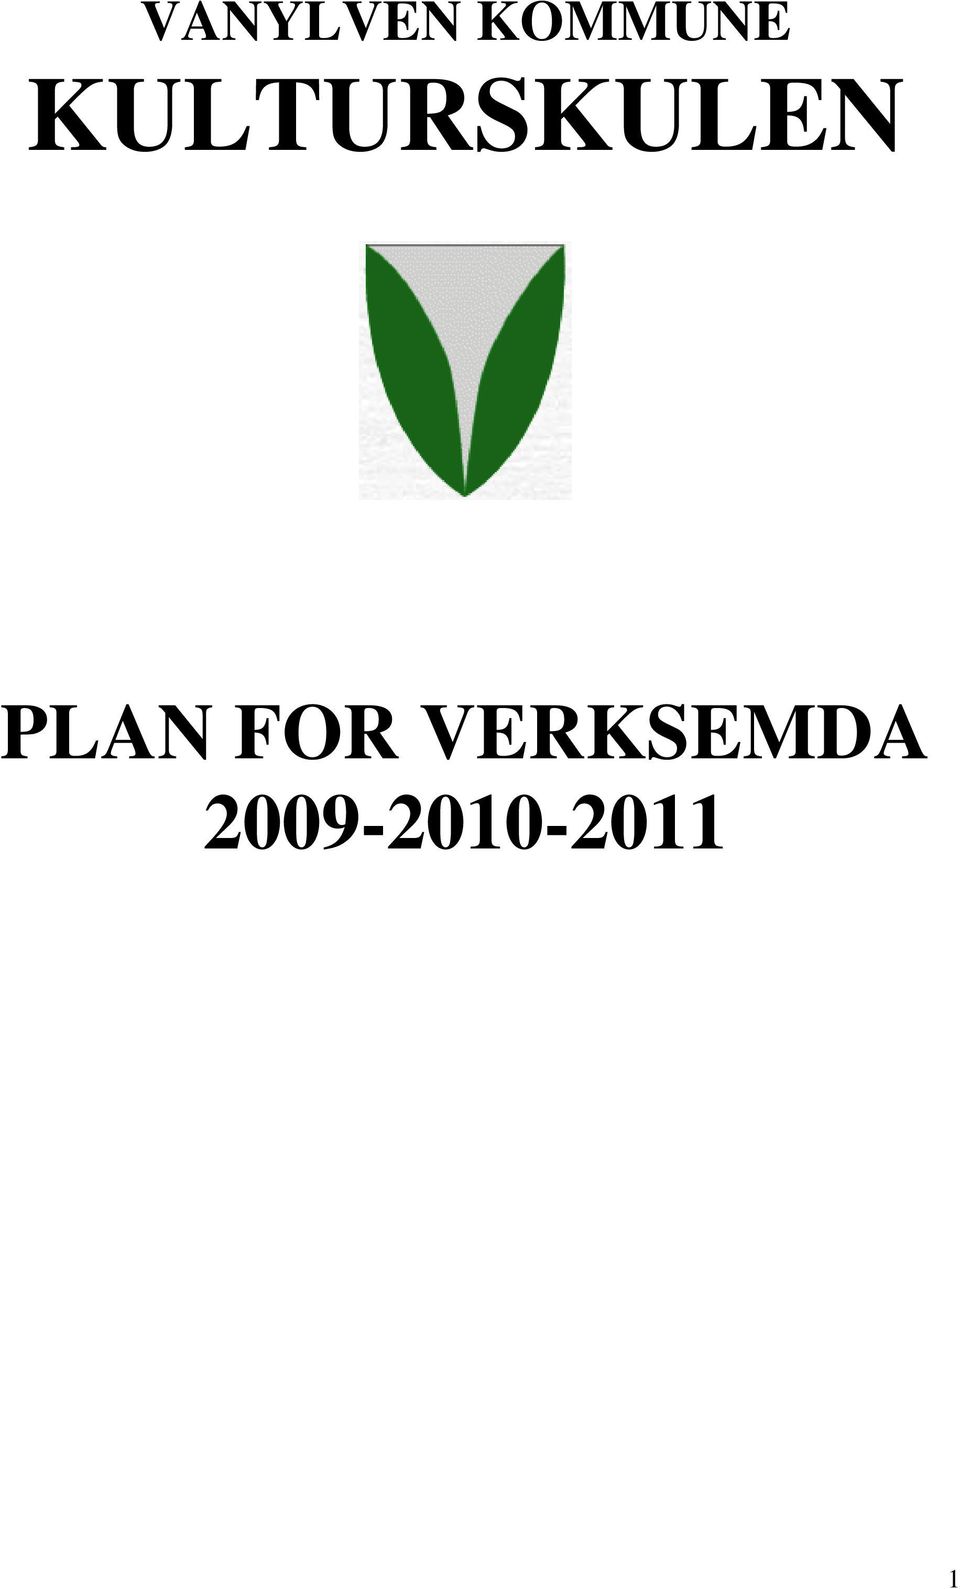 PLAN FOR